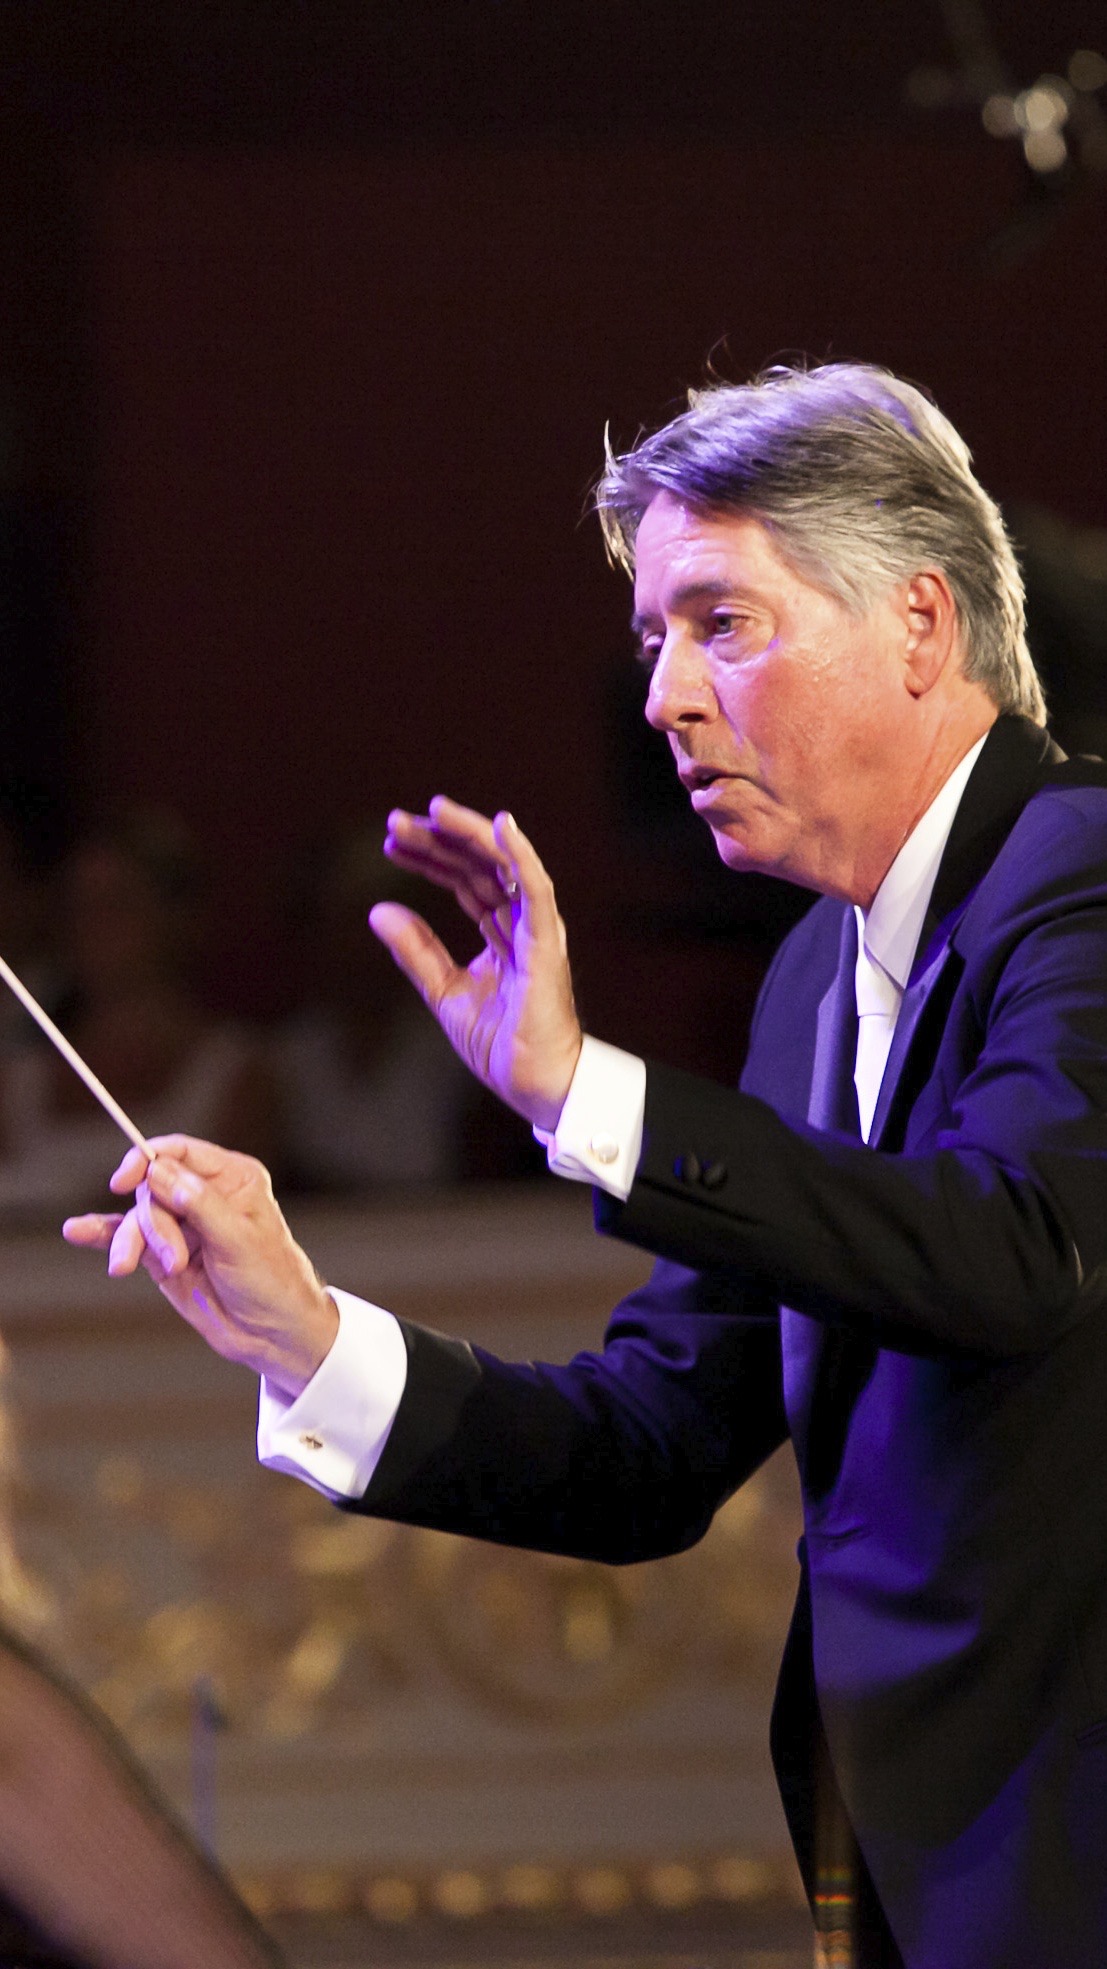 Alan Silvestri, Composer and Conductor